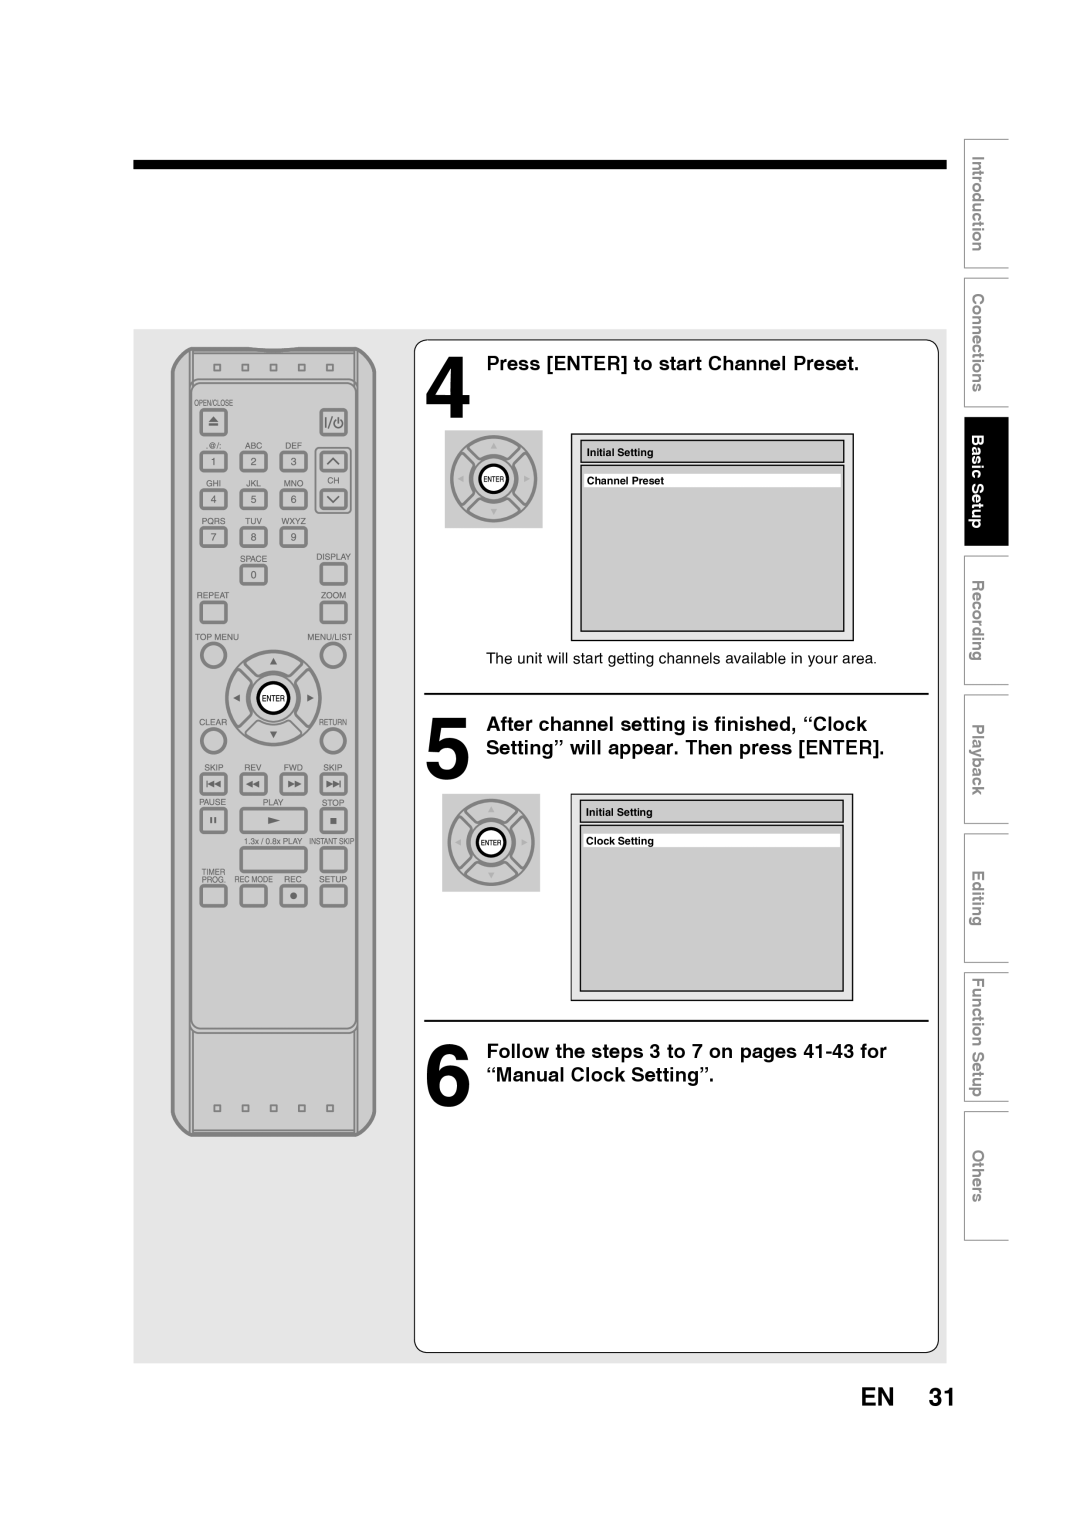 Toshiba D-RW2SU/D-RW2SC Press ENTER to start Channel Preset, Editing Function Setup Others, Initial Setting Channel Preset 